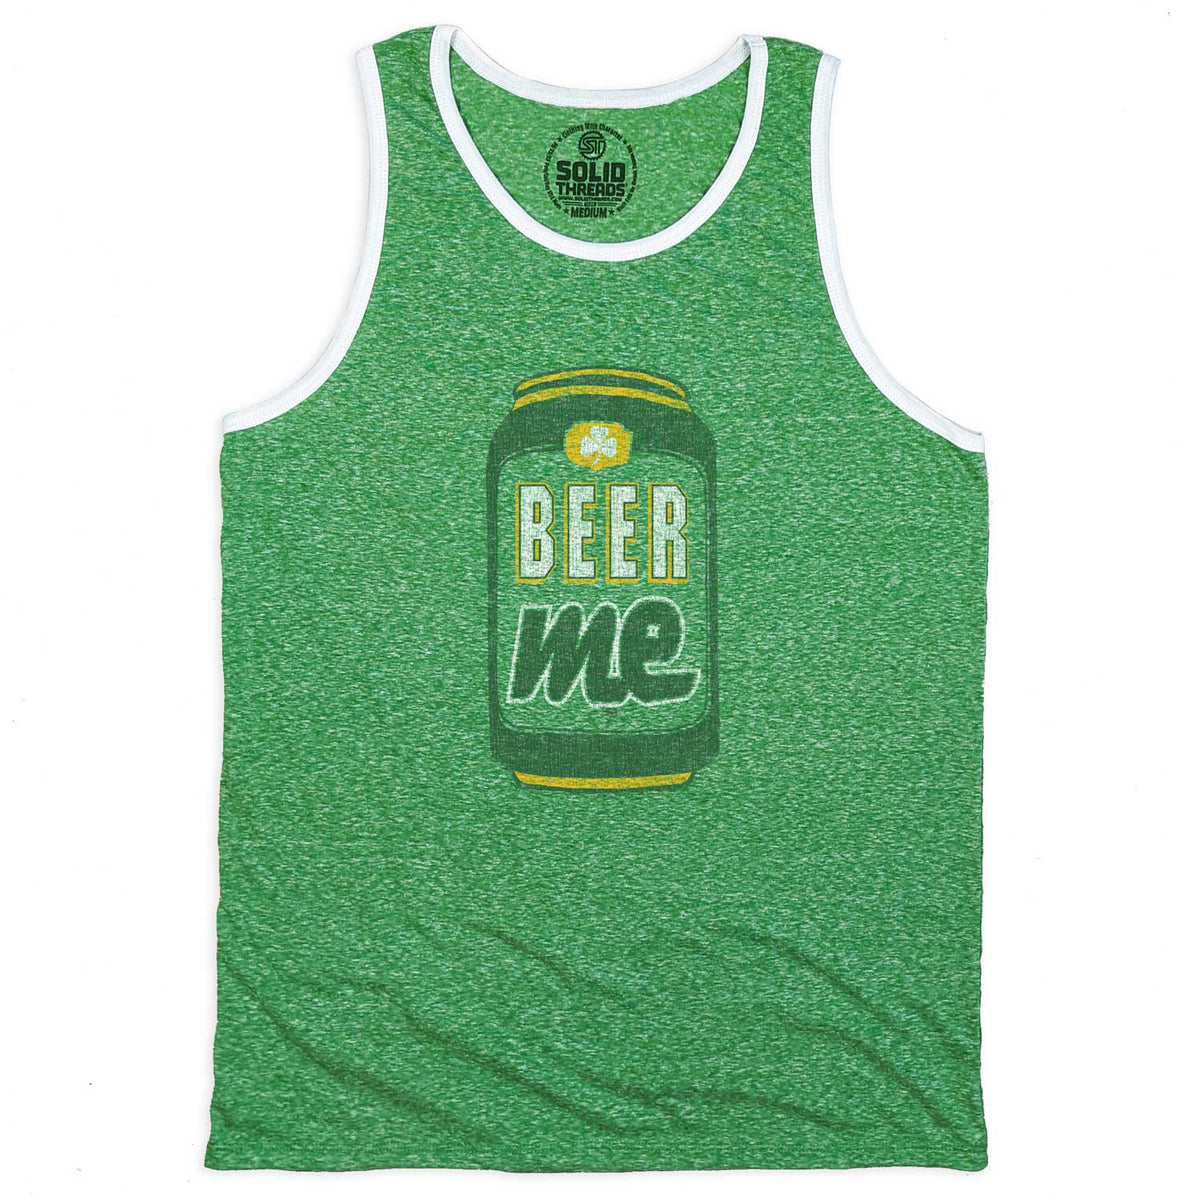 Men&#39;s Beer Me Vintage Graphic Tank Top | Funny Drinking T-shirt | Solid Threads